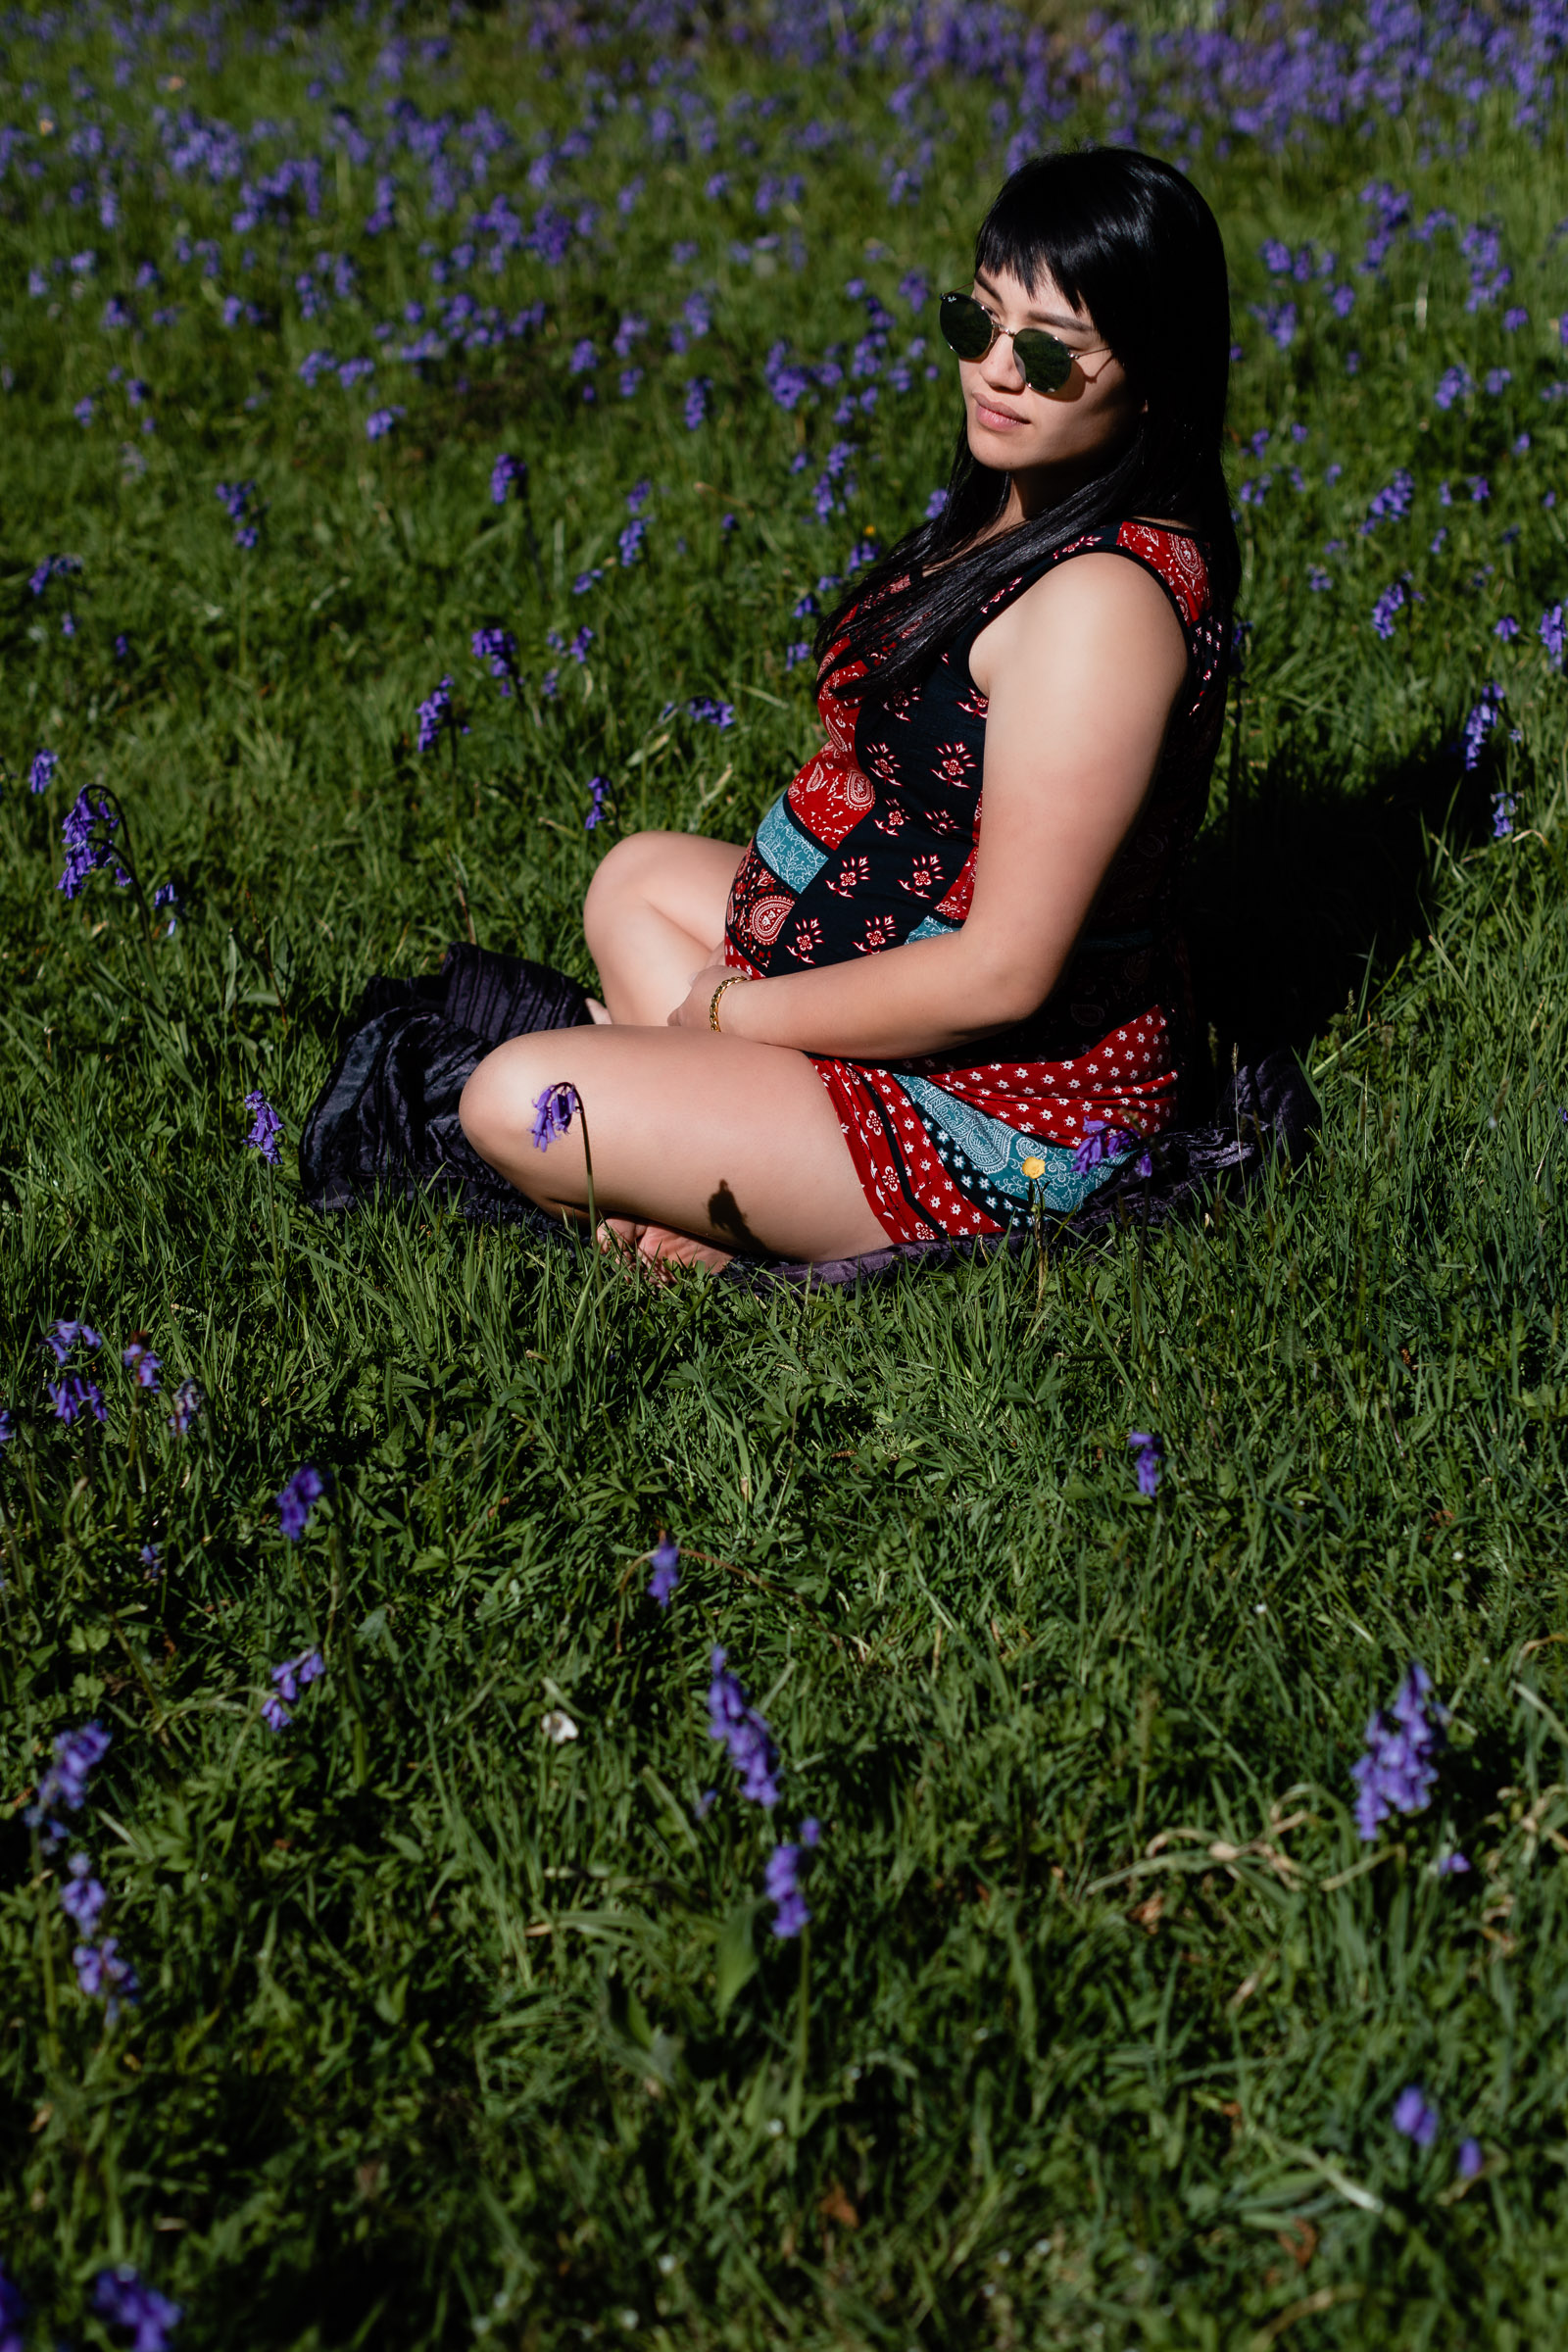 A young woman in late pregnancy sitting cross legged on a grassy area with bluebells on a maternity shoot in West Sussex